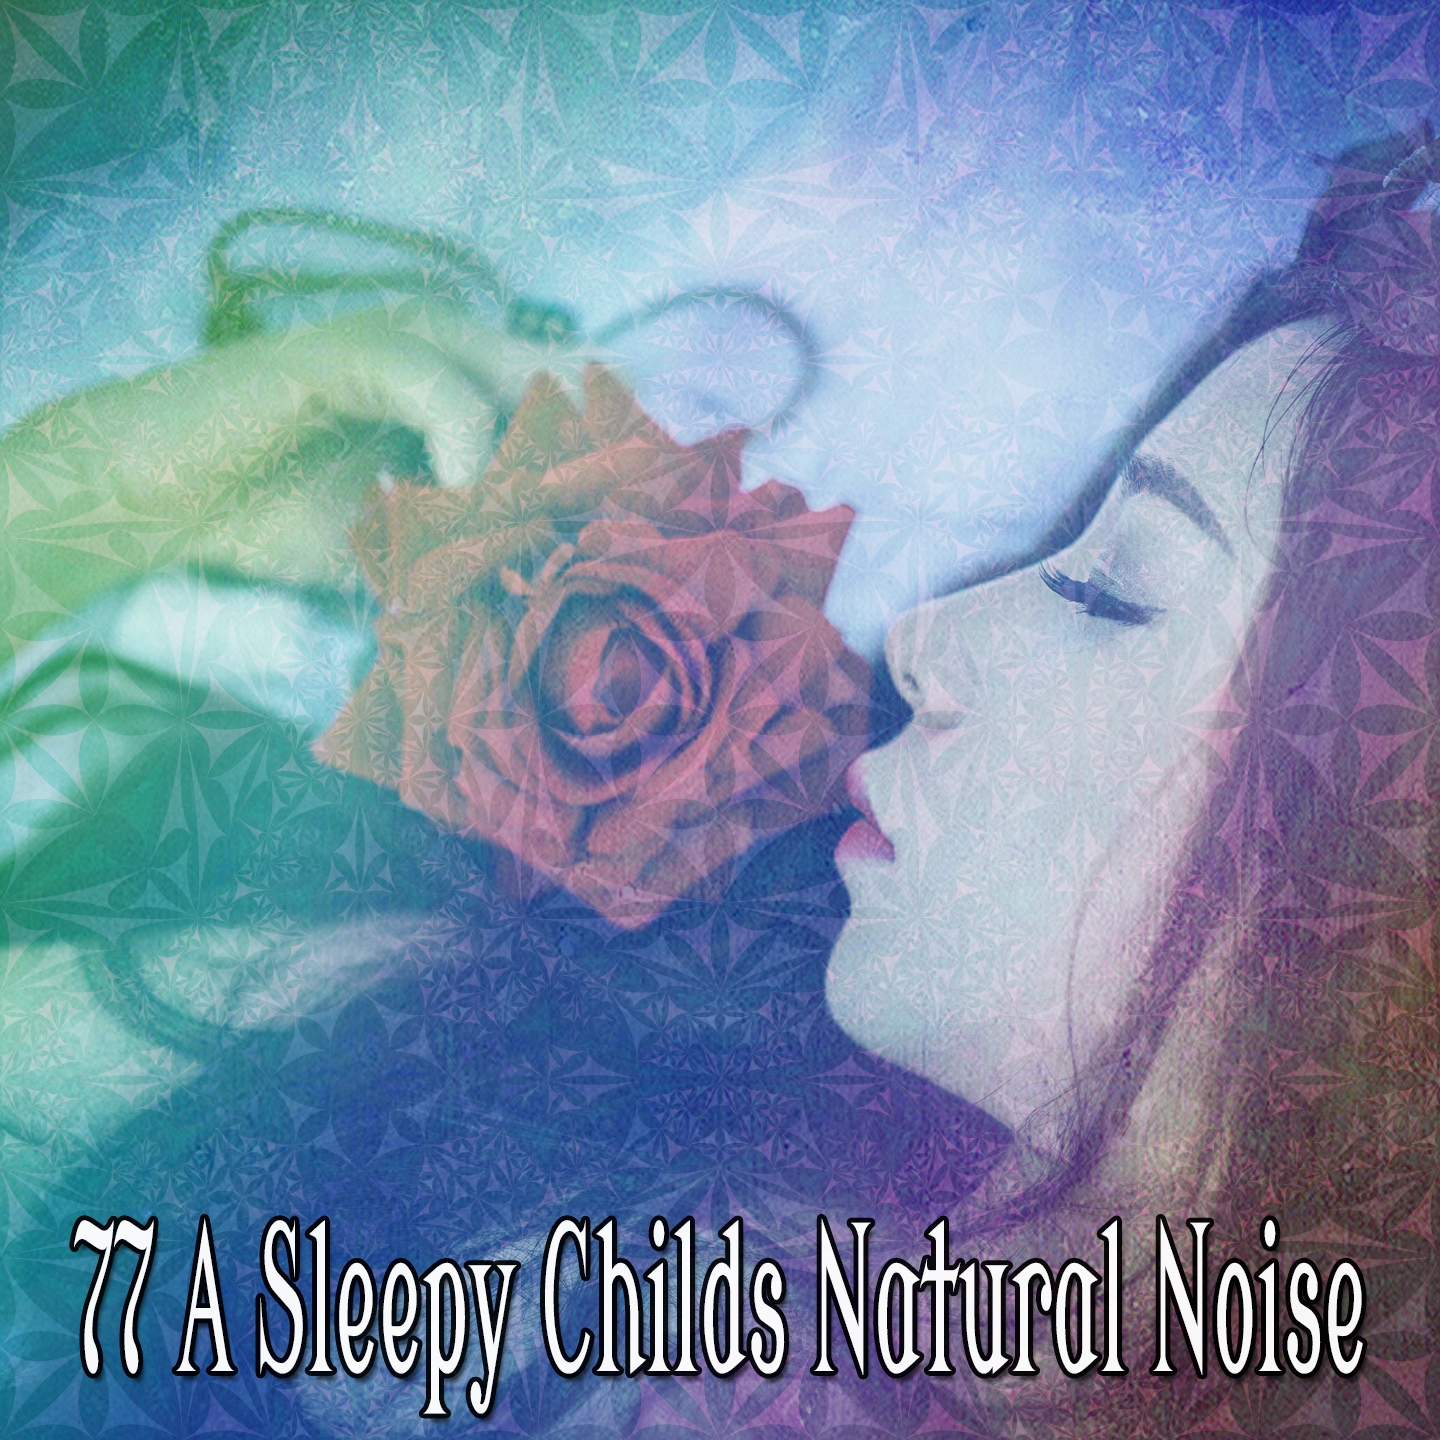 77 A Sleepy Childs Natural Noise